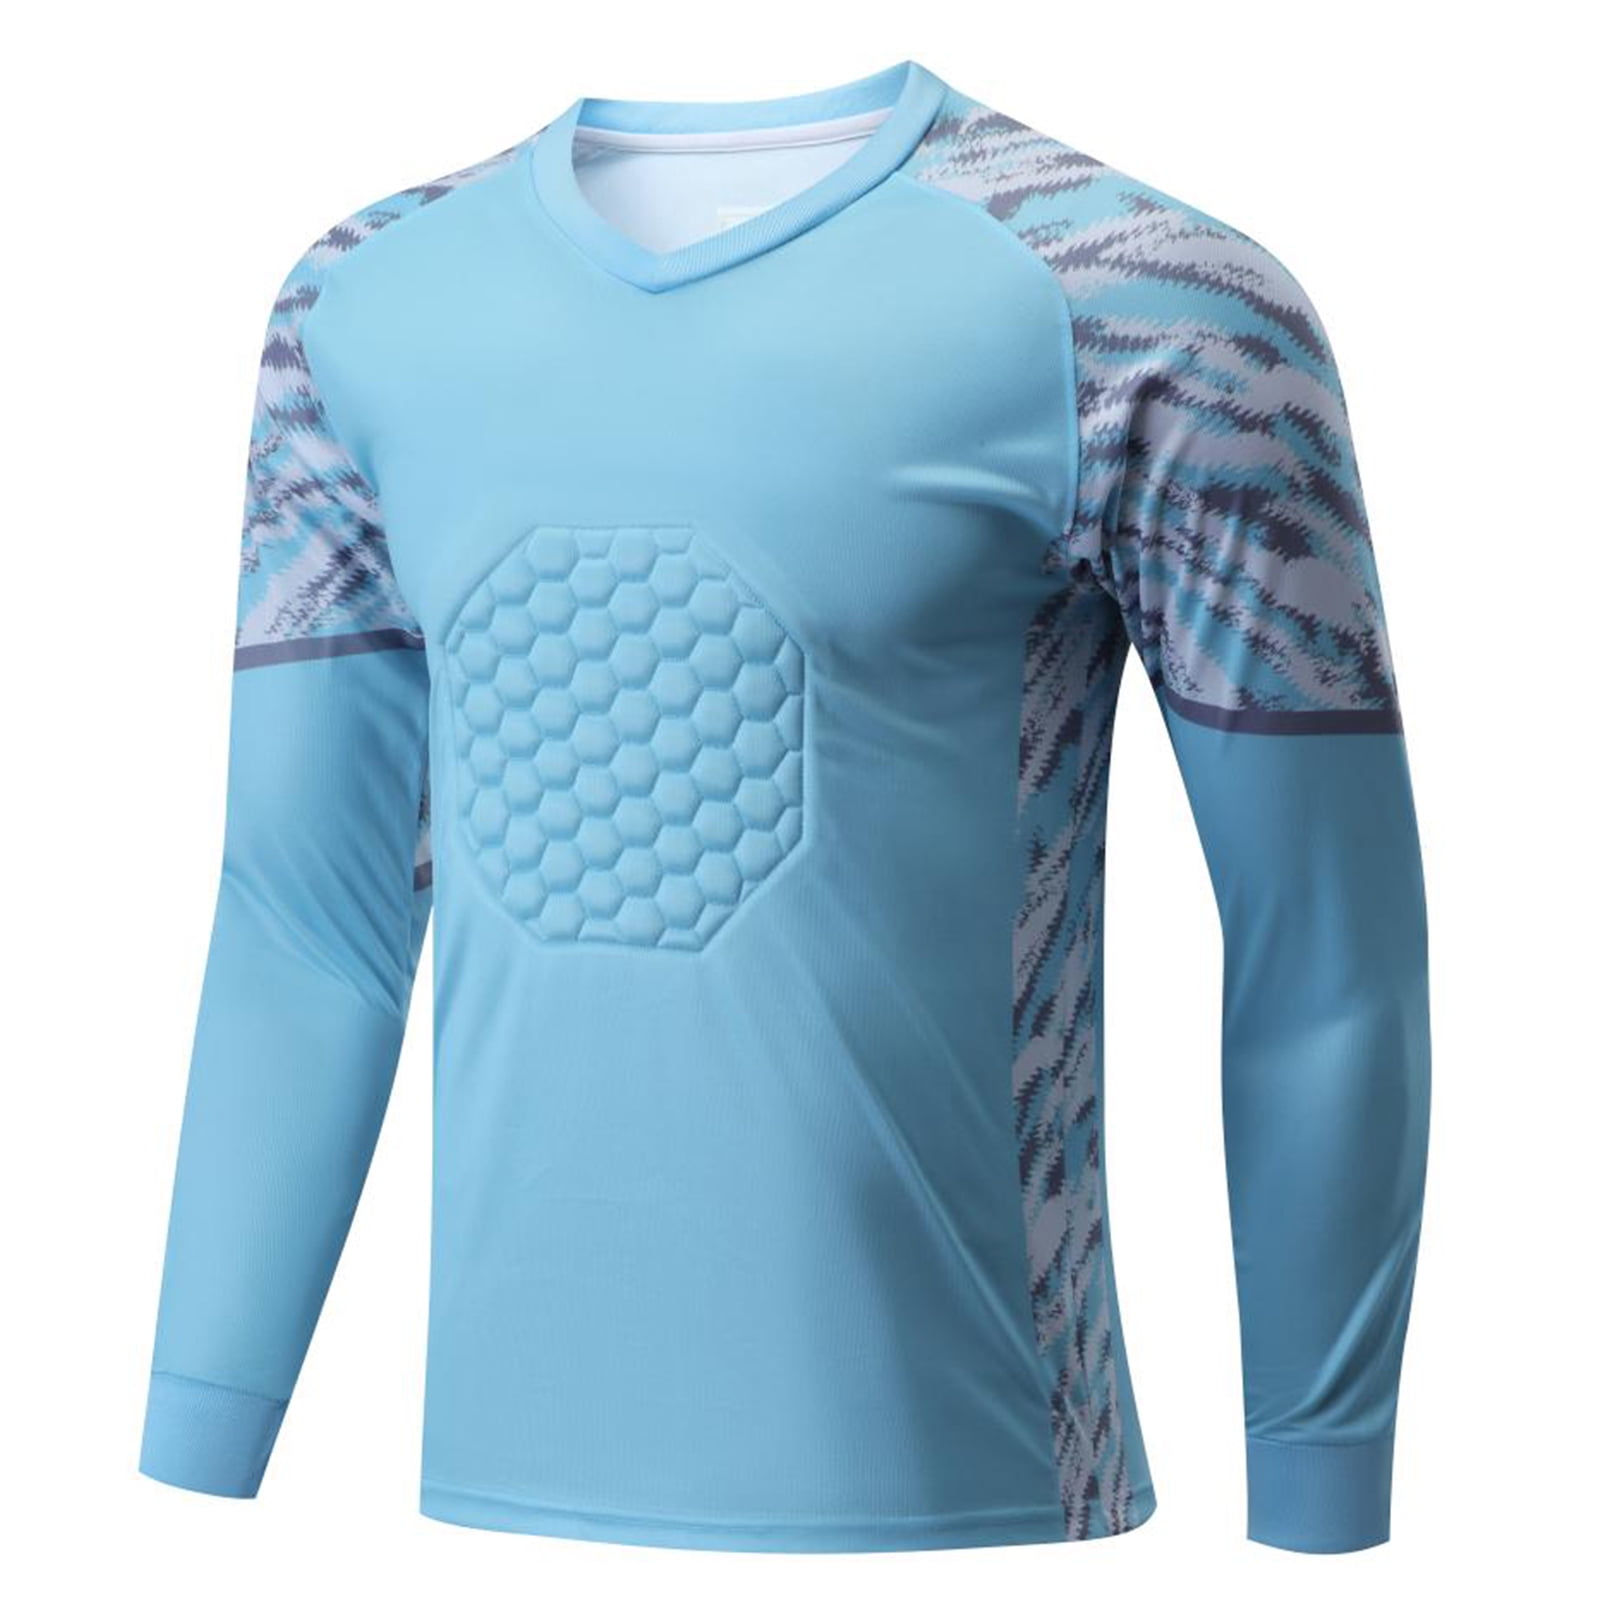 Mexico Blank Blue Goalkeeper Long Sleeves Kid Soccer Country Jersey